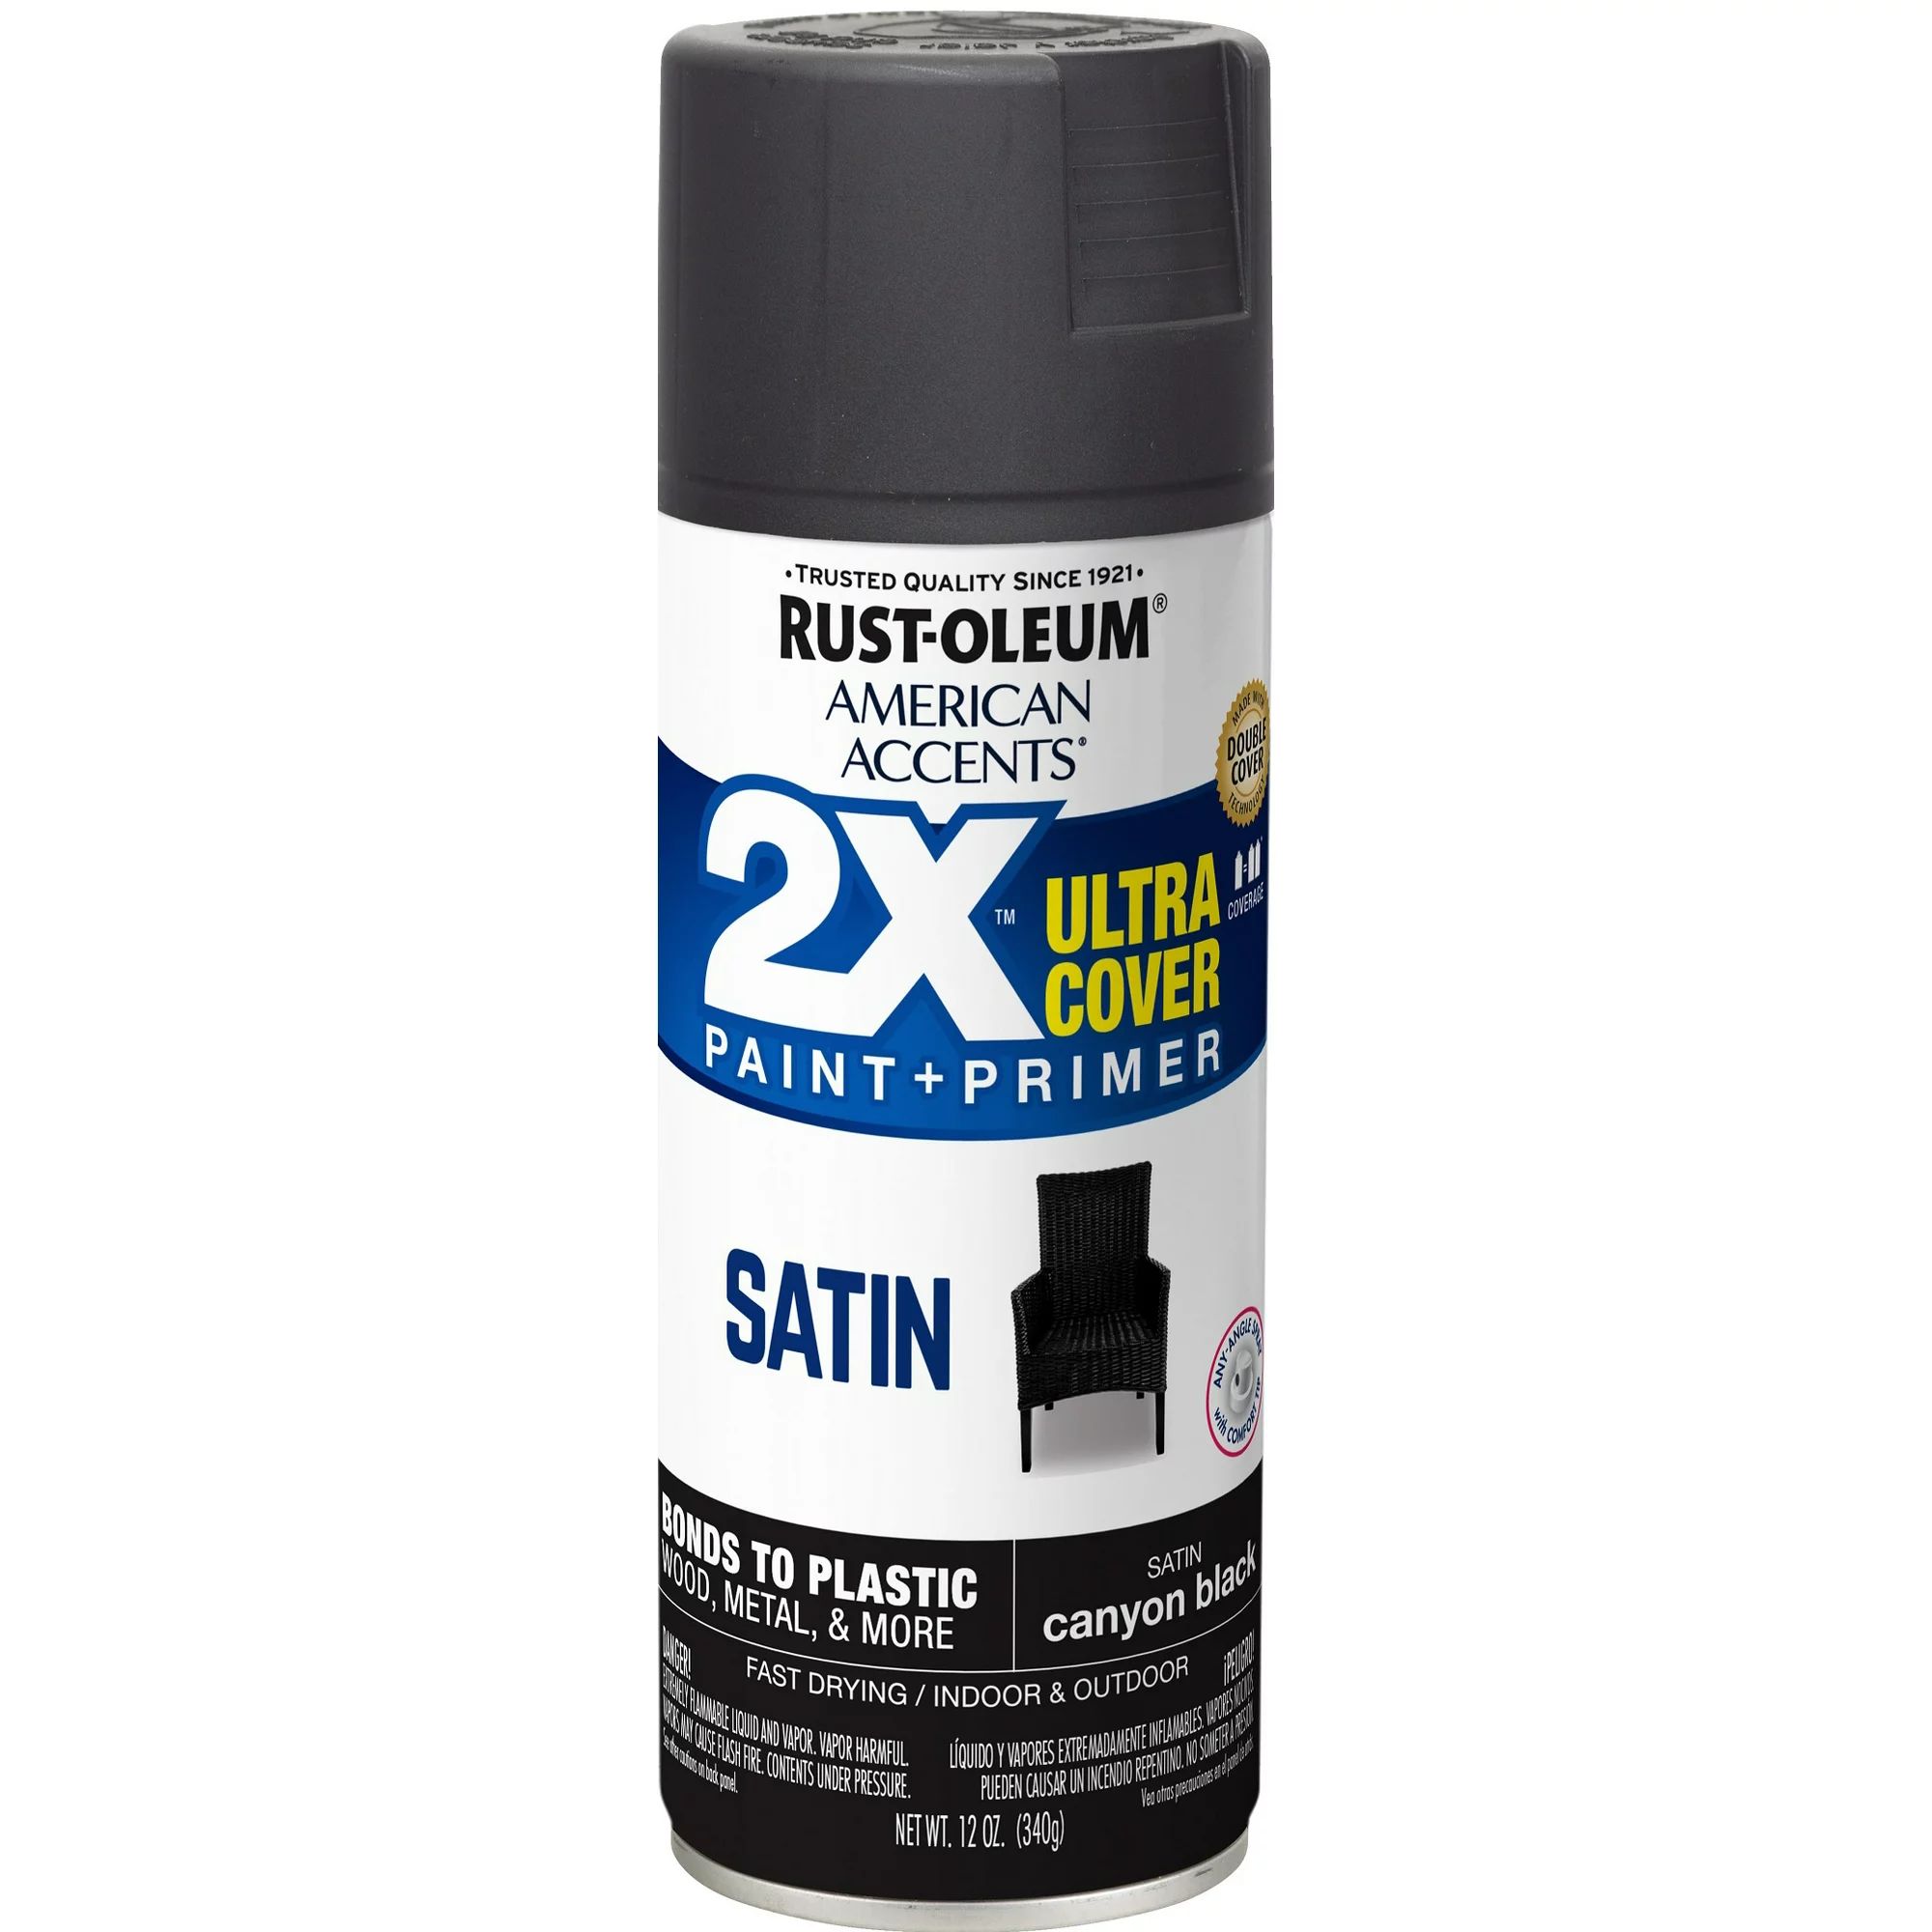 Canyon Black, Rust-Oleum American Accents 2X Ultra Cover Satin Spray Paint, 12 oz | Walmart (US)